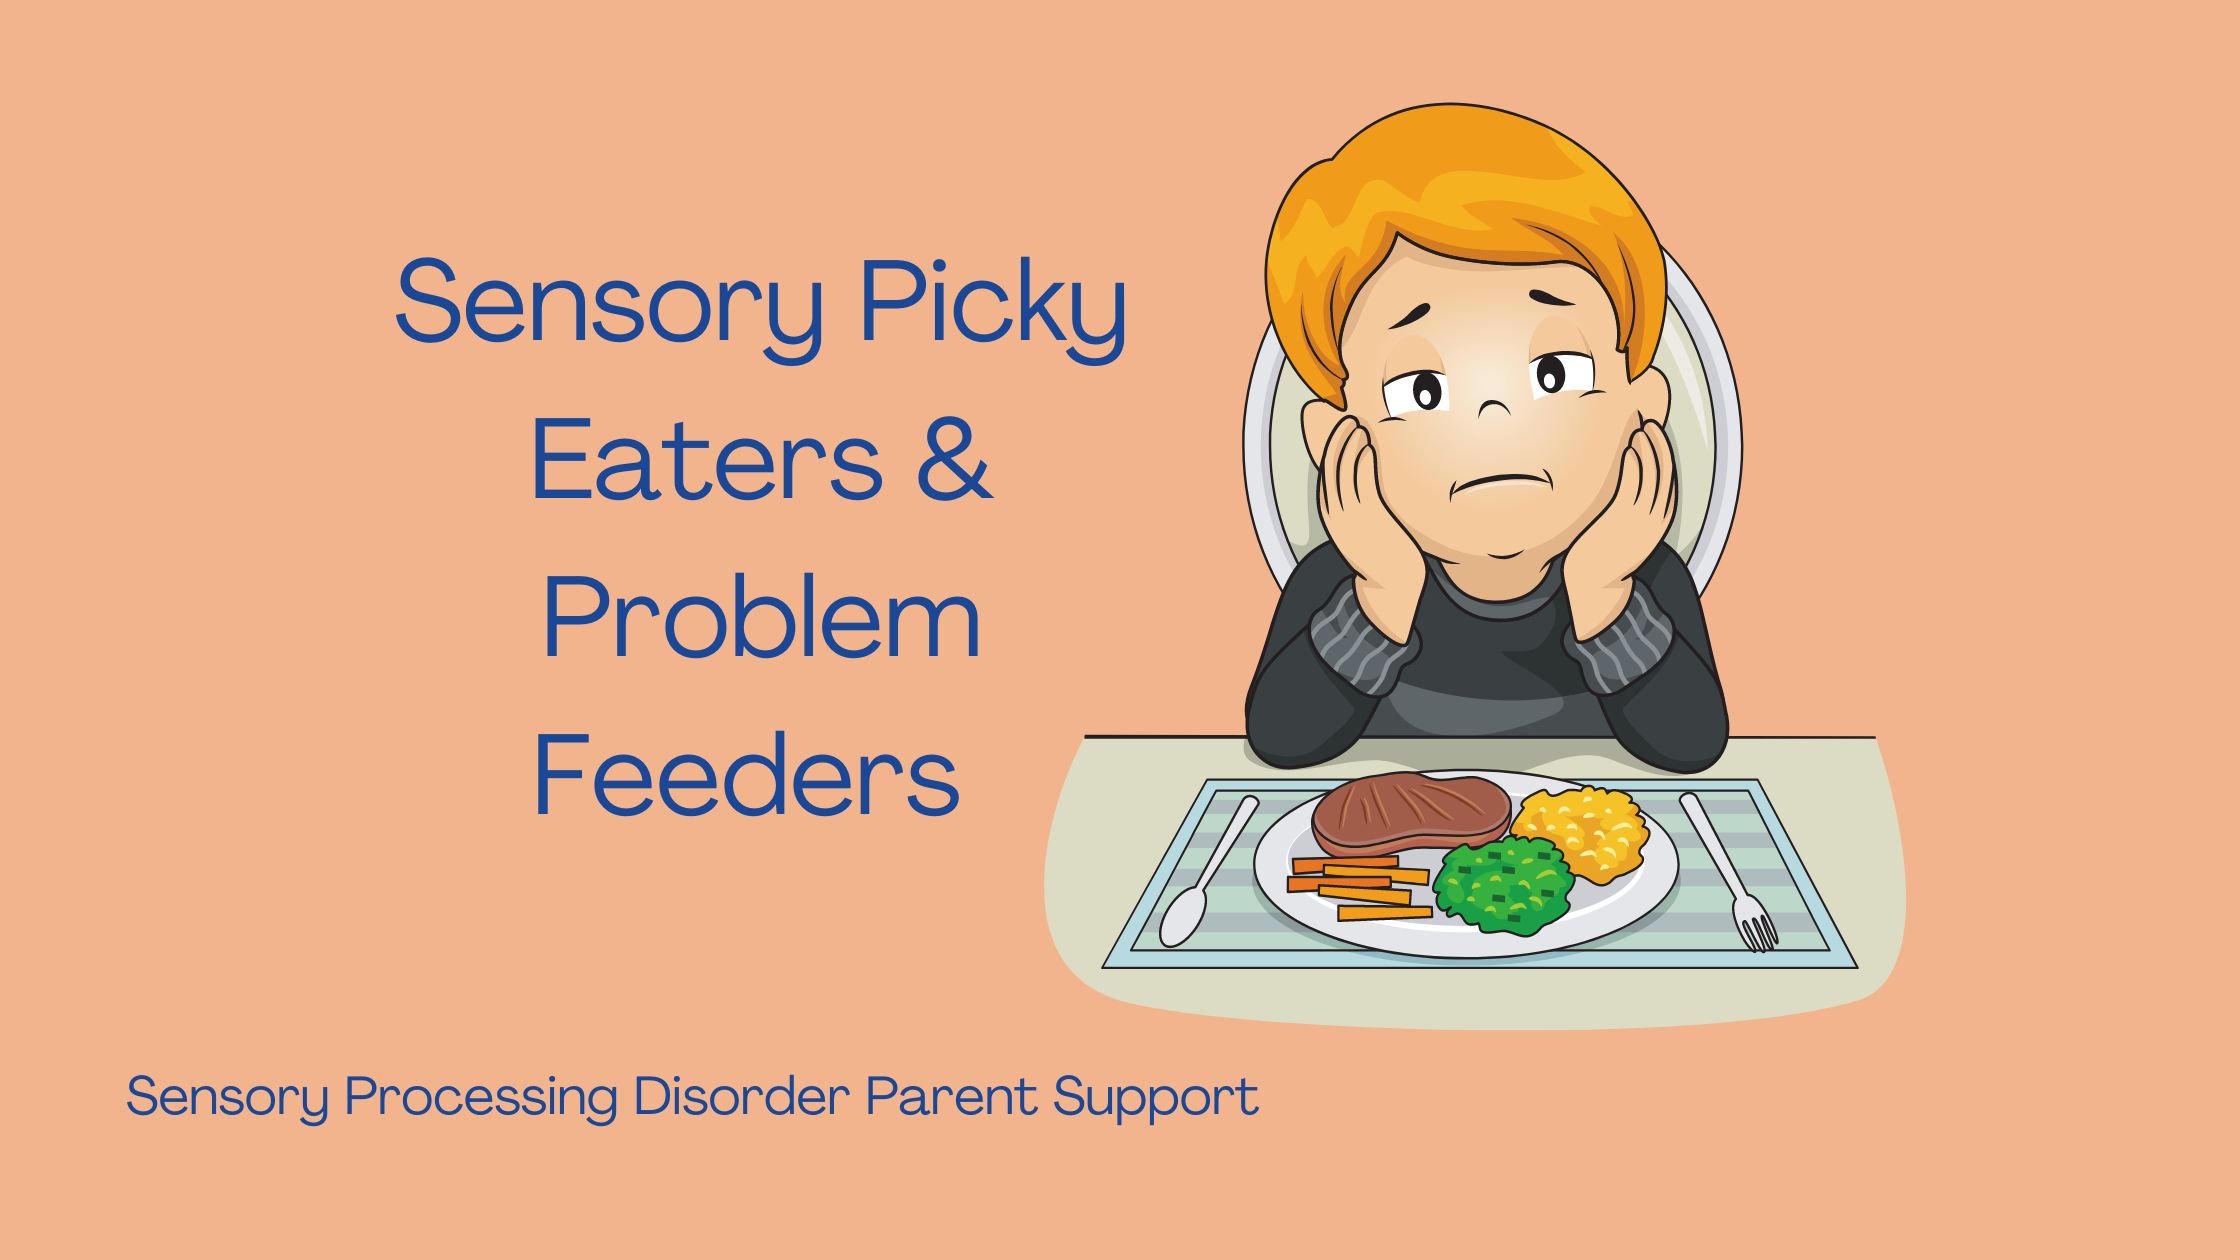 child with sensory processing disorder who wont eat his food Sensory Picky Eaters & Problem Feeders